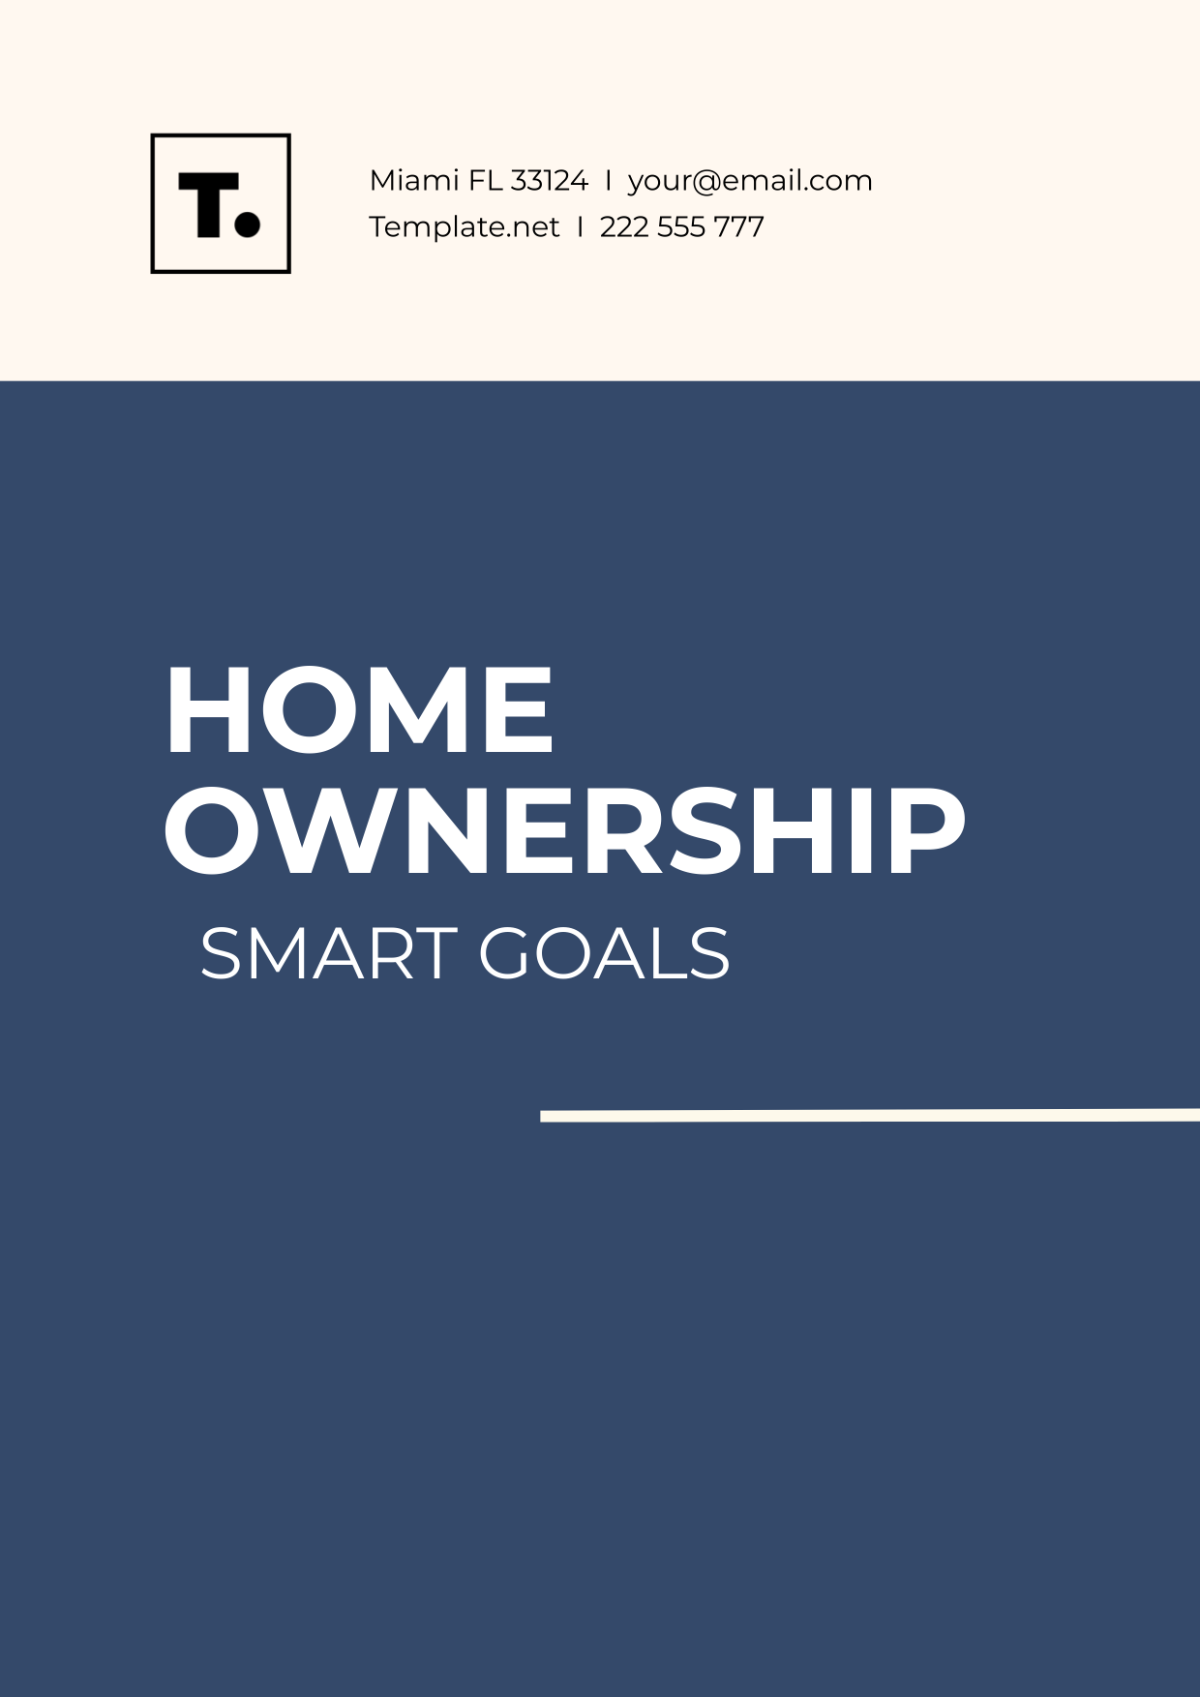 SMART Goals Template for Home Ownership